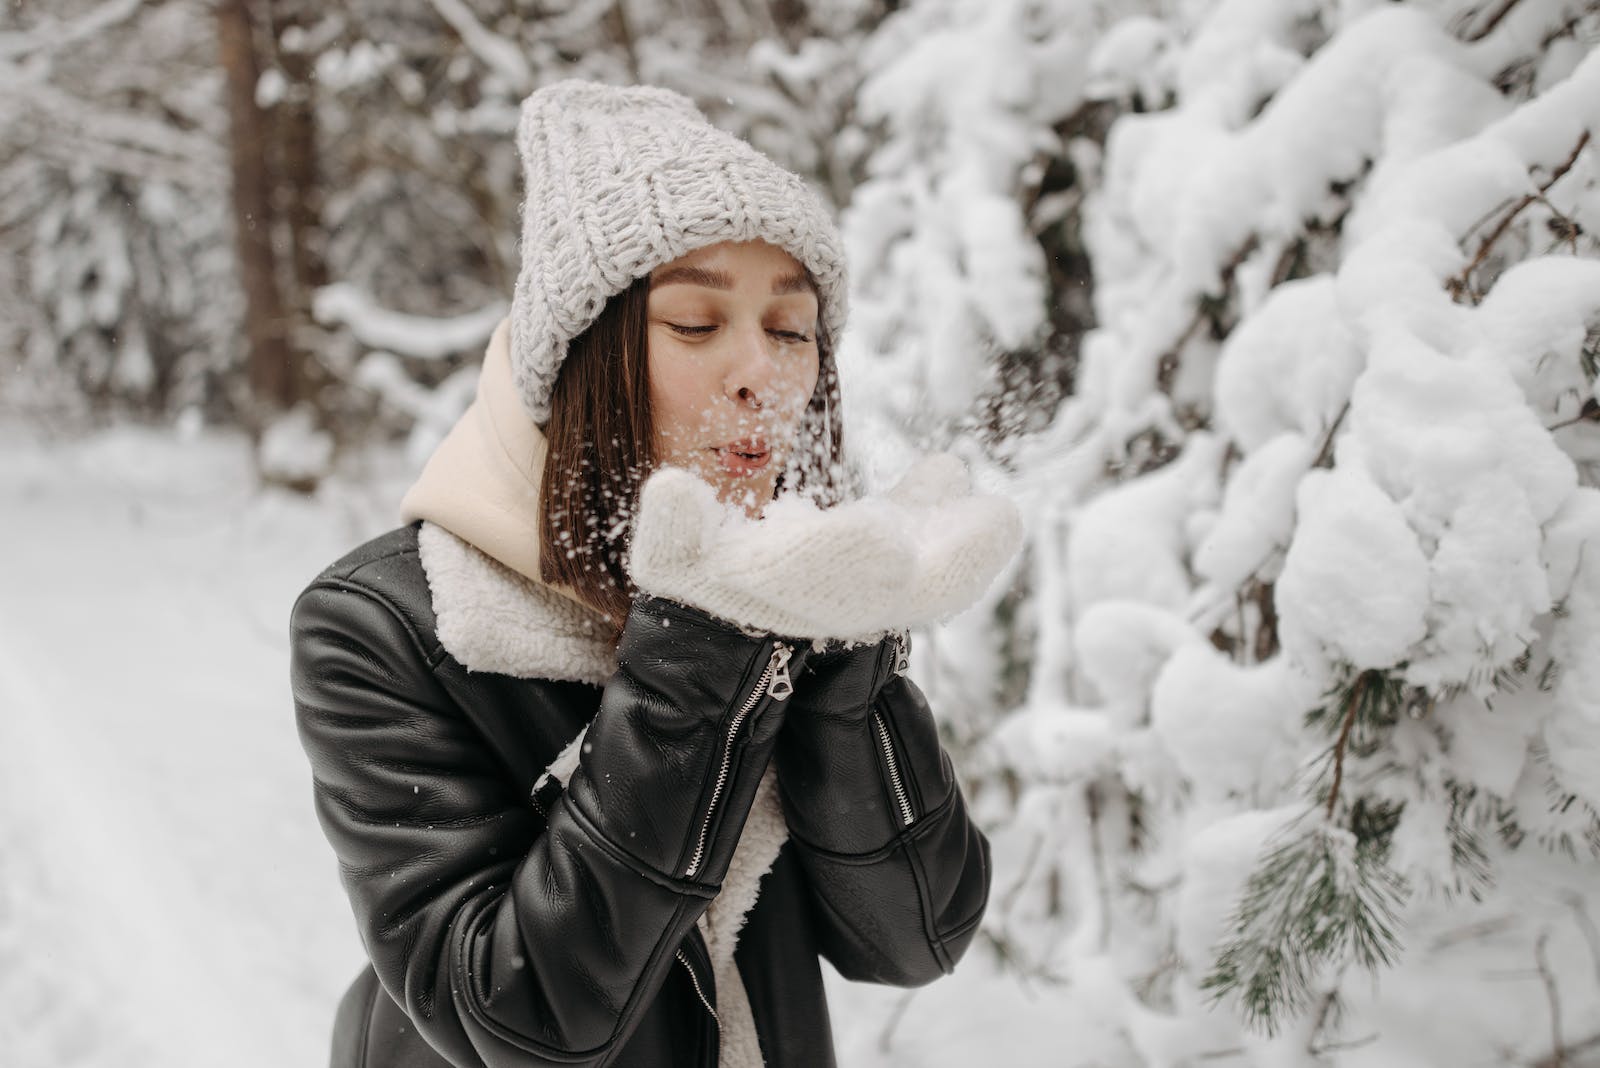 Photo of a Woman in a Black Leather Jacket Blowing Snow on Her Hands